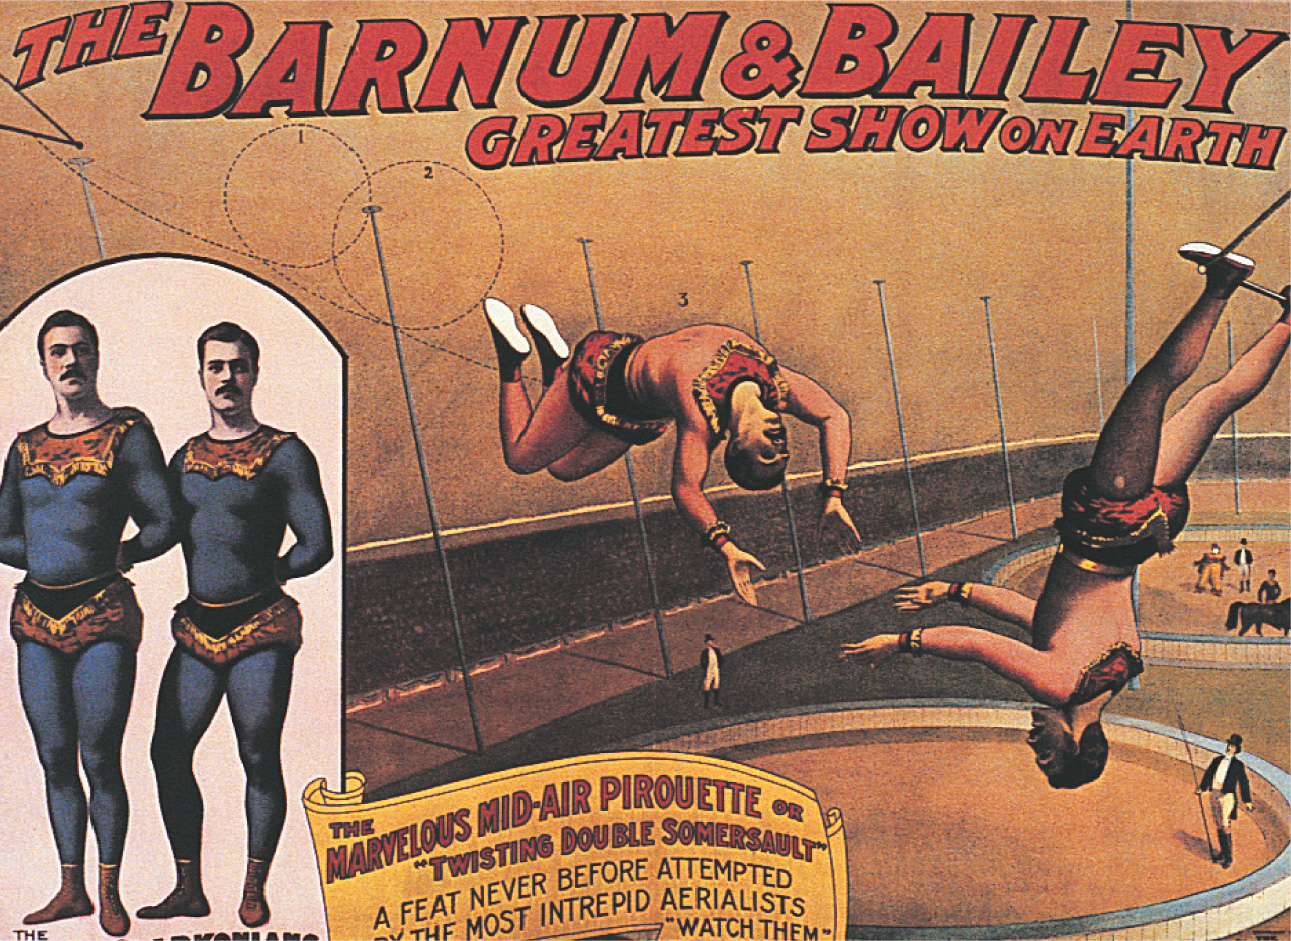 A poster: circus performers swing from a trapeze. The Barnum and Bailey Greatest Show on Earth.